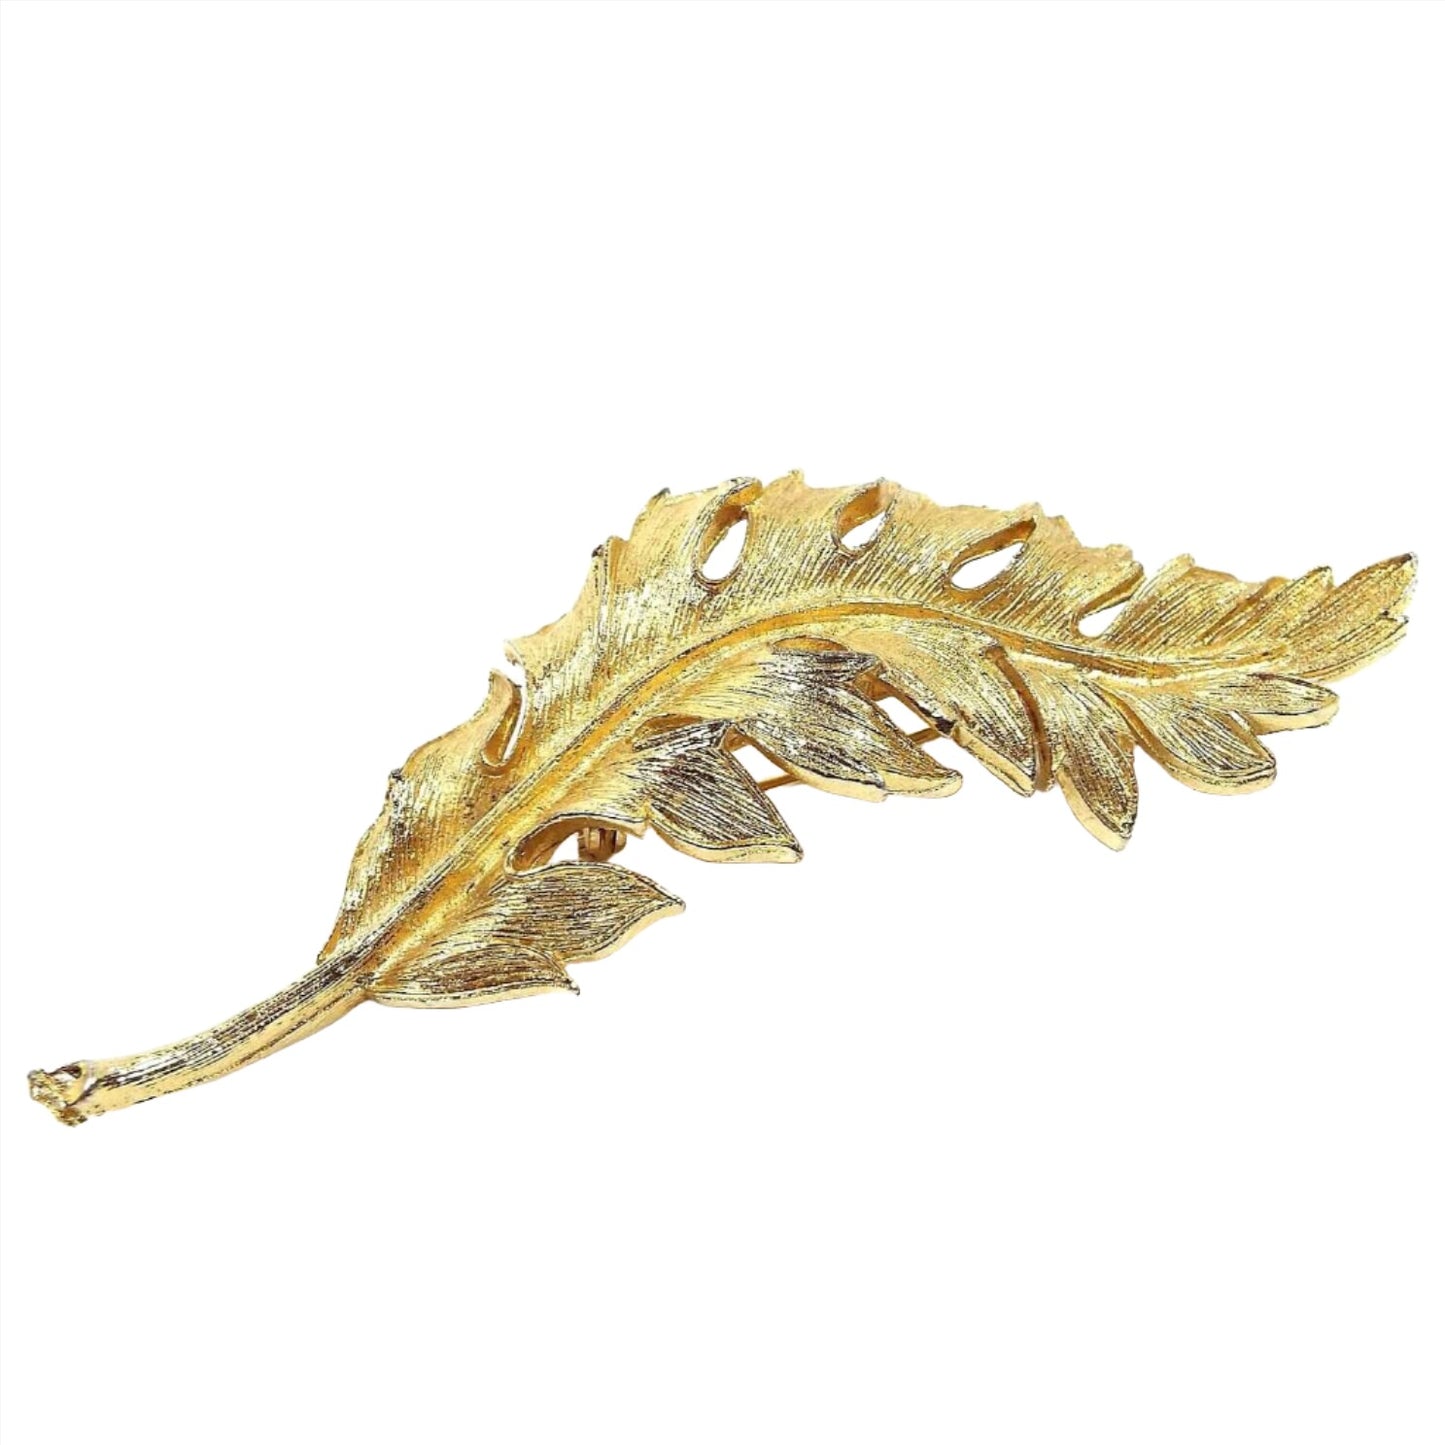 Front view of the 1961 Mid Century vintage Coro leaf brooch pin. It is shaped like a long leaf with stem and is nicely detailed in gold tone color metal. 